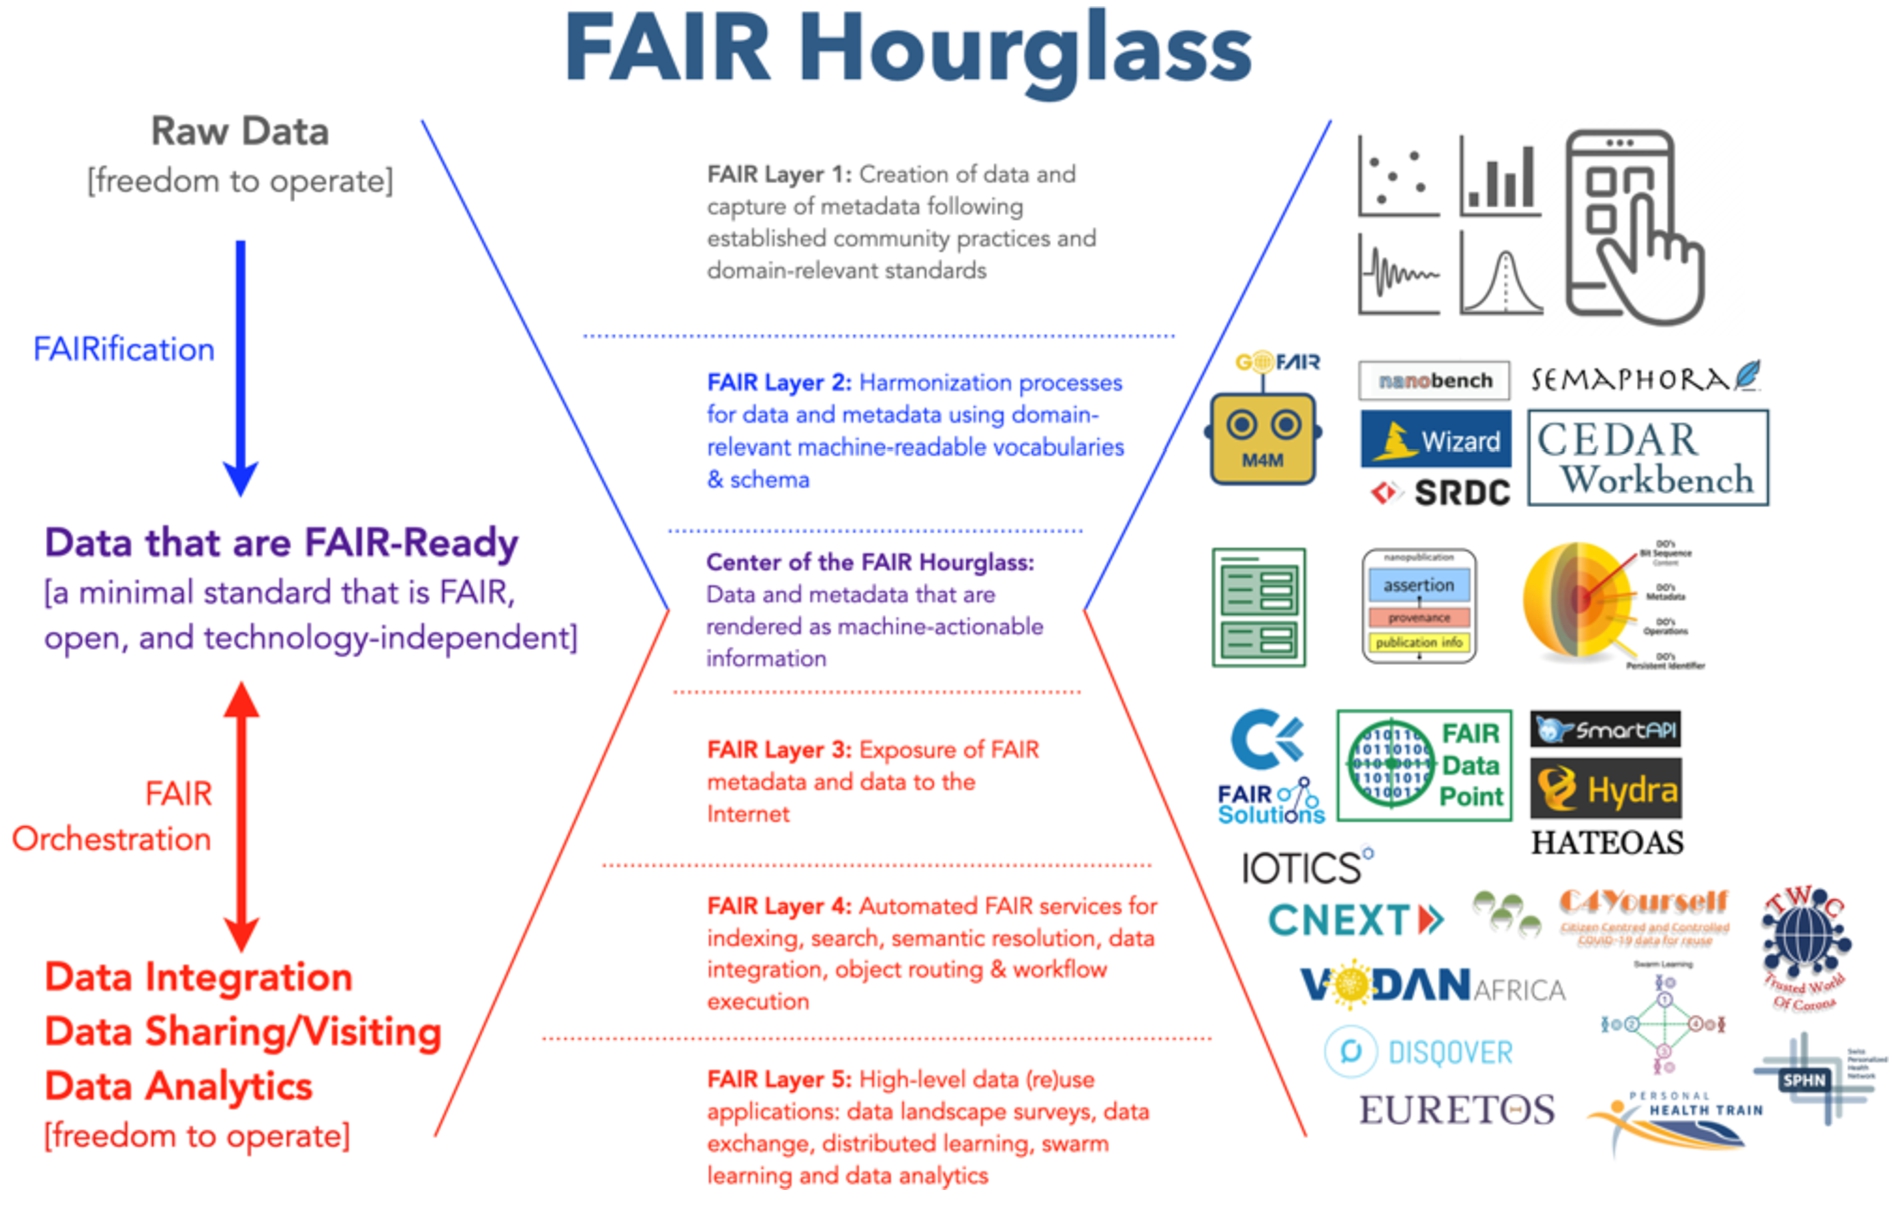 The FAIR Hourglass as a general framework for FAIR implementation. Methodologies and technologies (logos, on right side of the figure) supporting specialized FAIR implementation functions at the different layers are provided as examples but do not constitute an exhaustive list of emerging solutions.